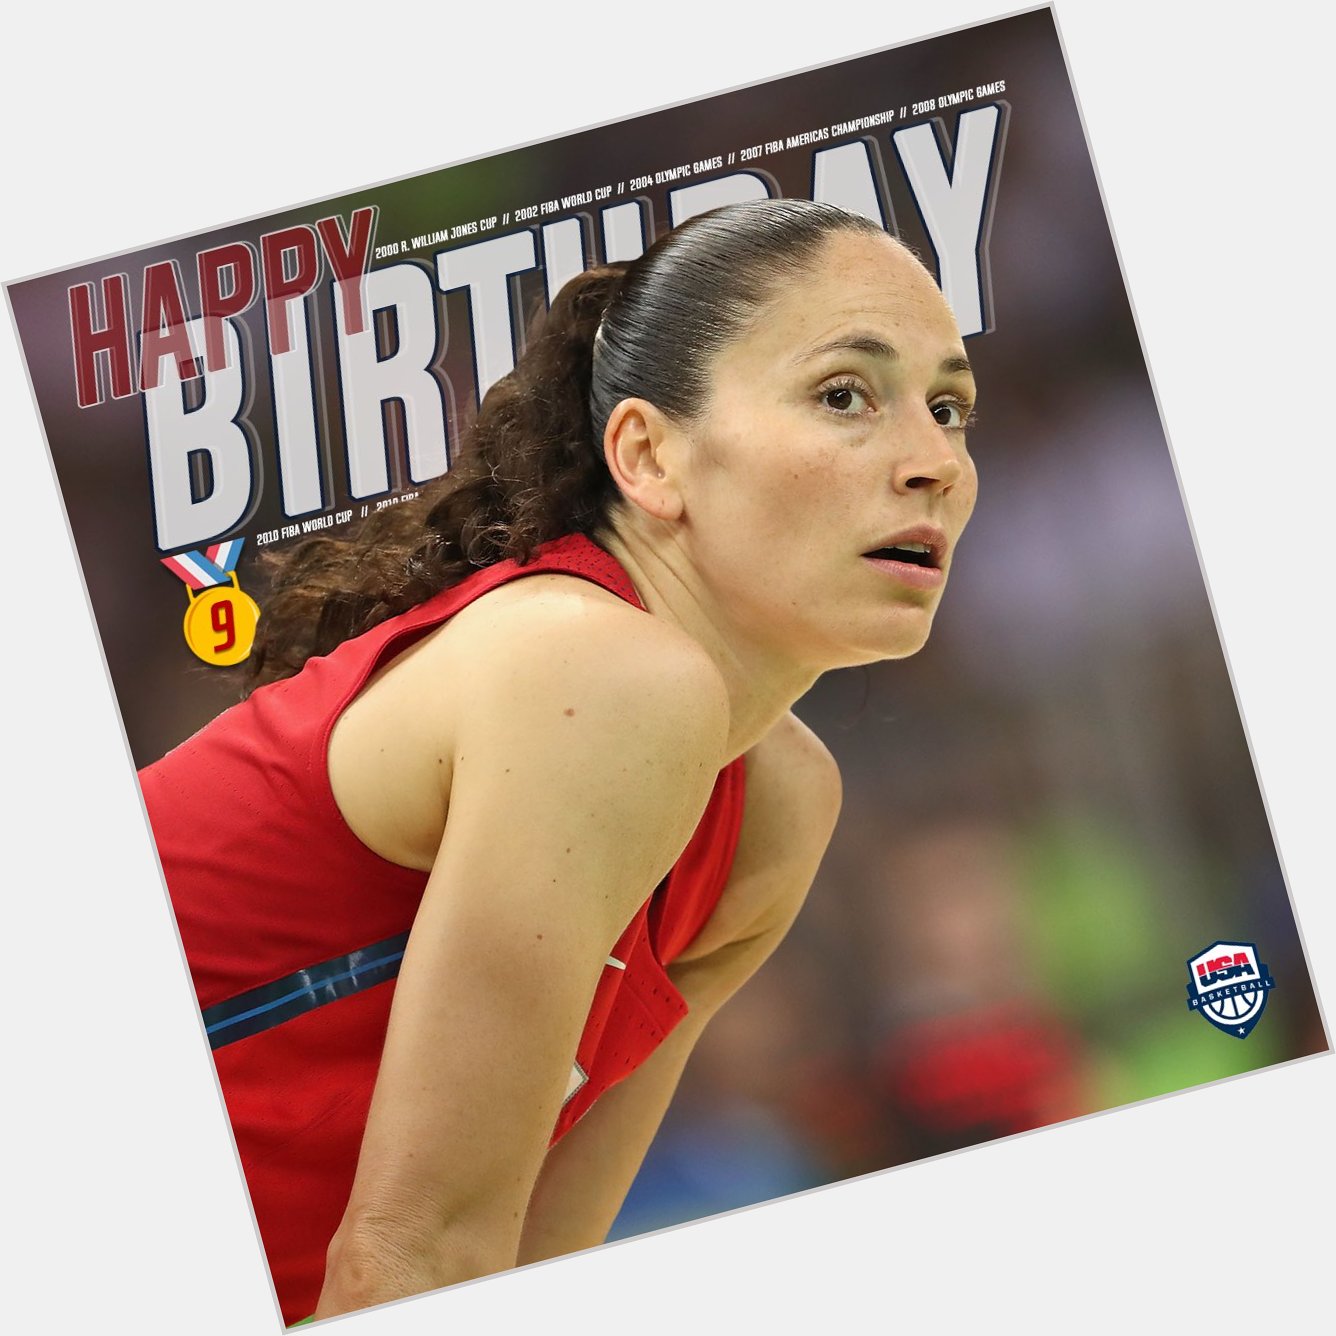 Her career speaks for itself. Wishing a happy birthday to one of the greatest, Sue Bird! 